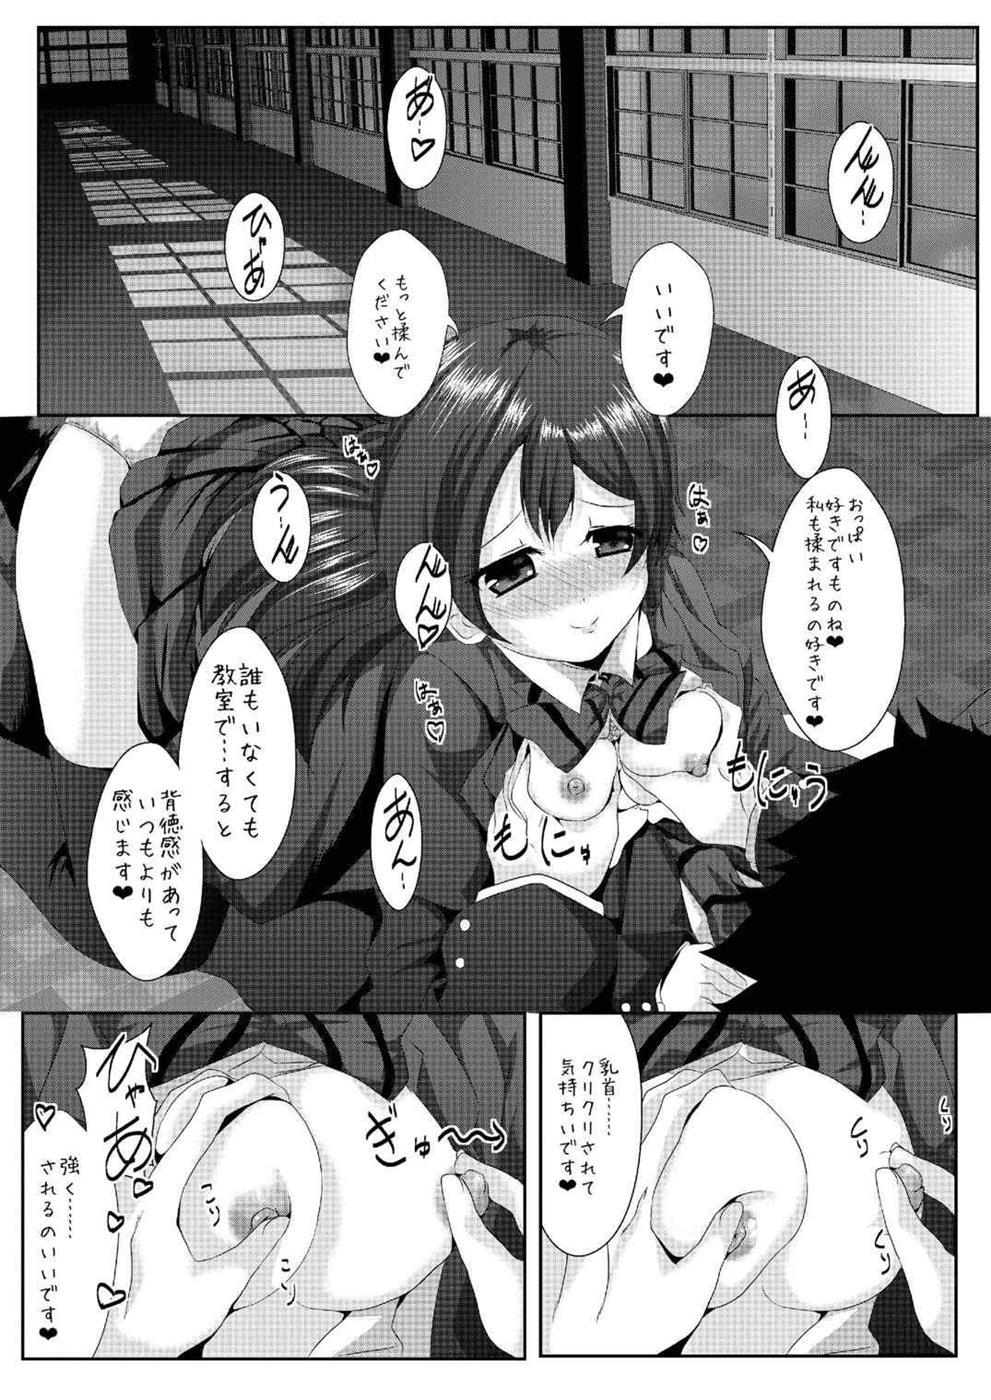 Boys whiteday - Love live From - Page 11